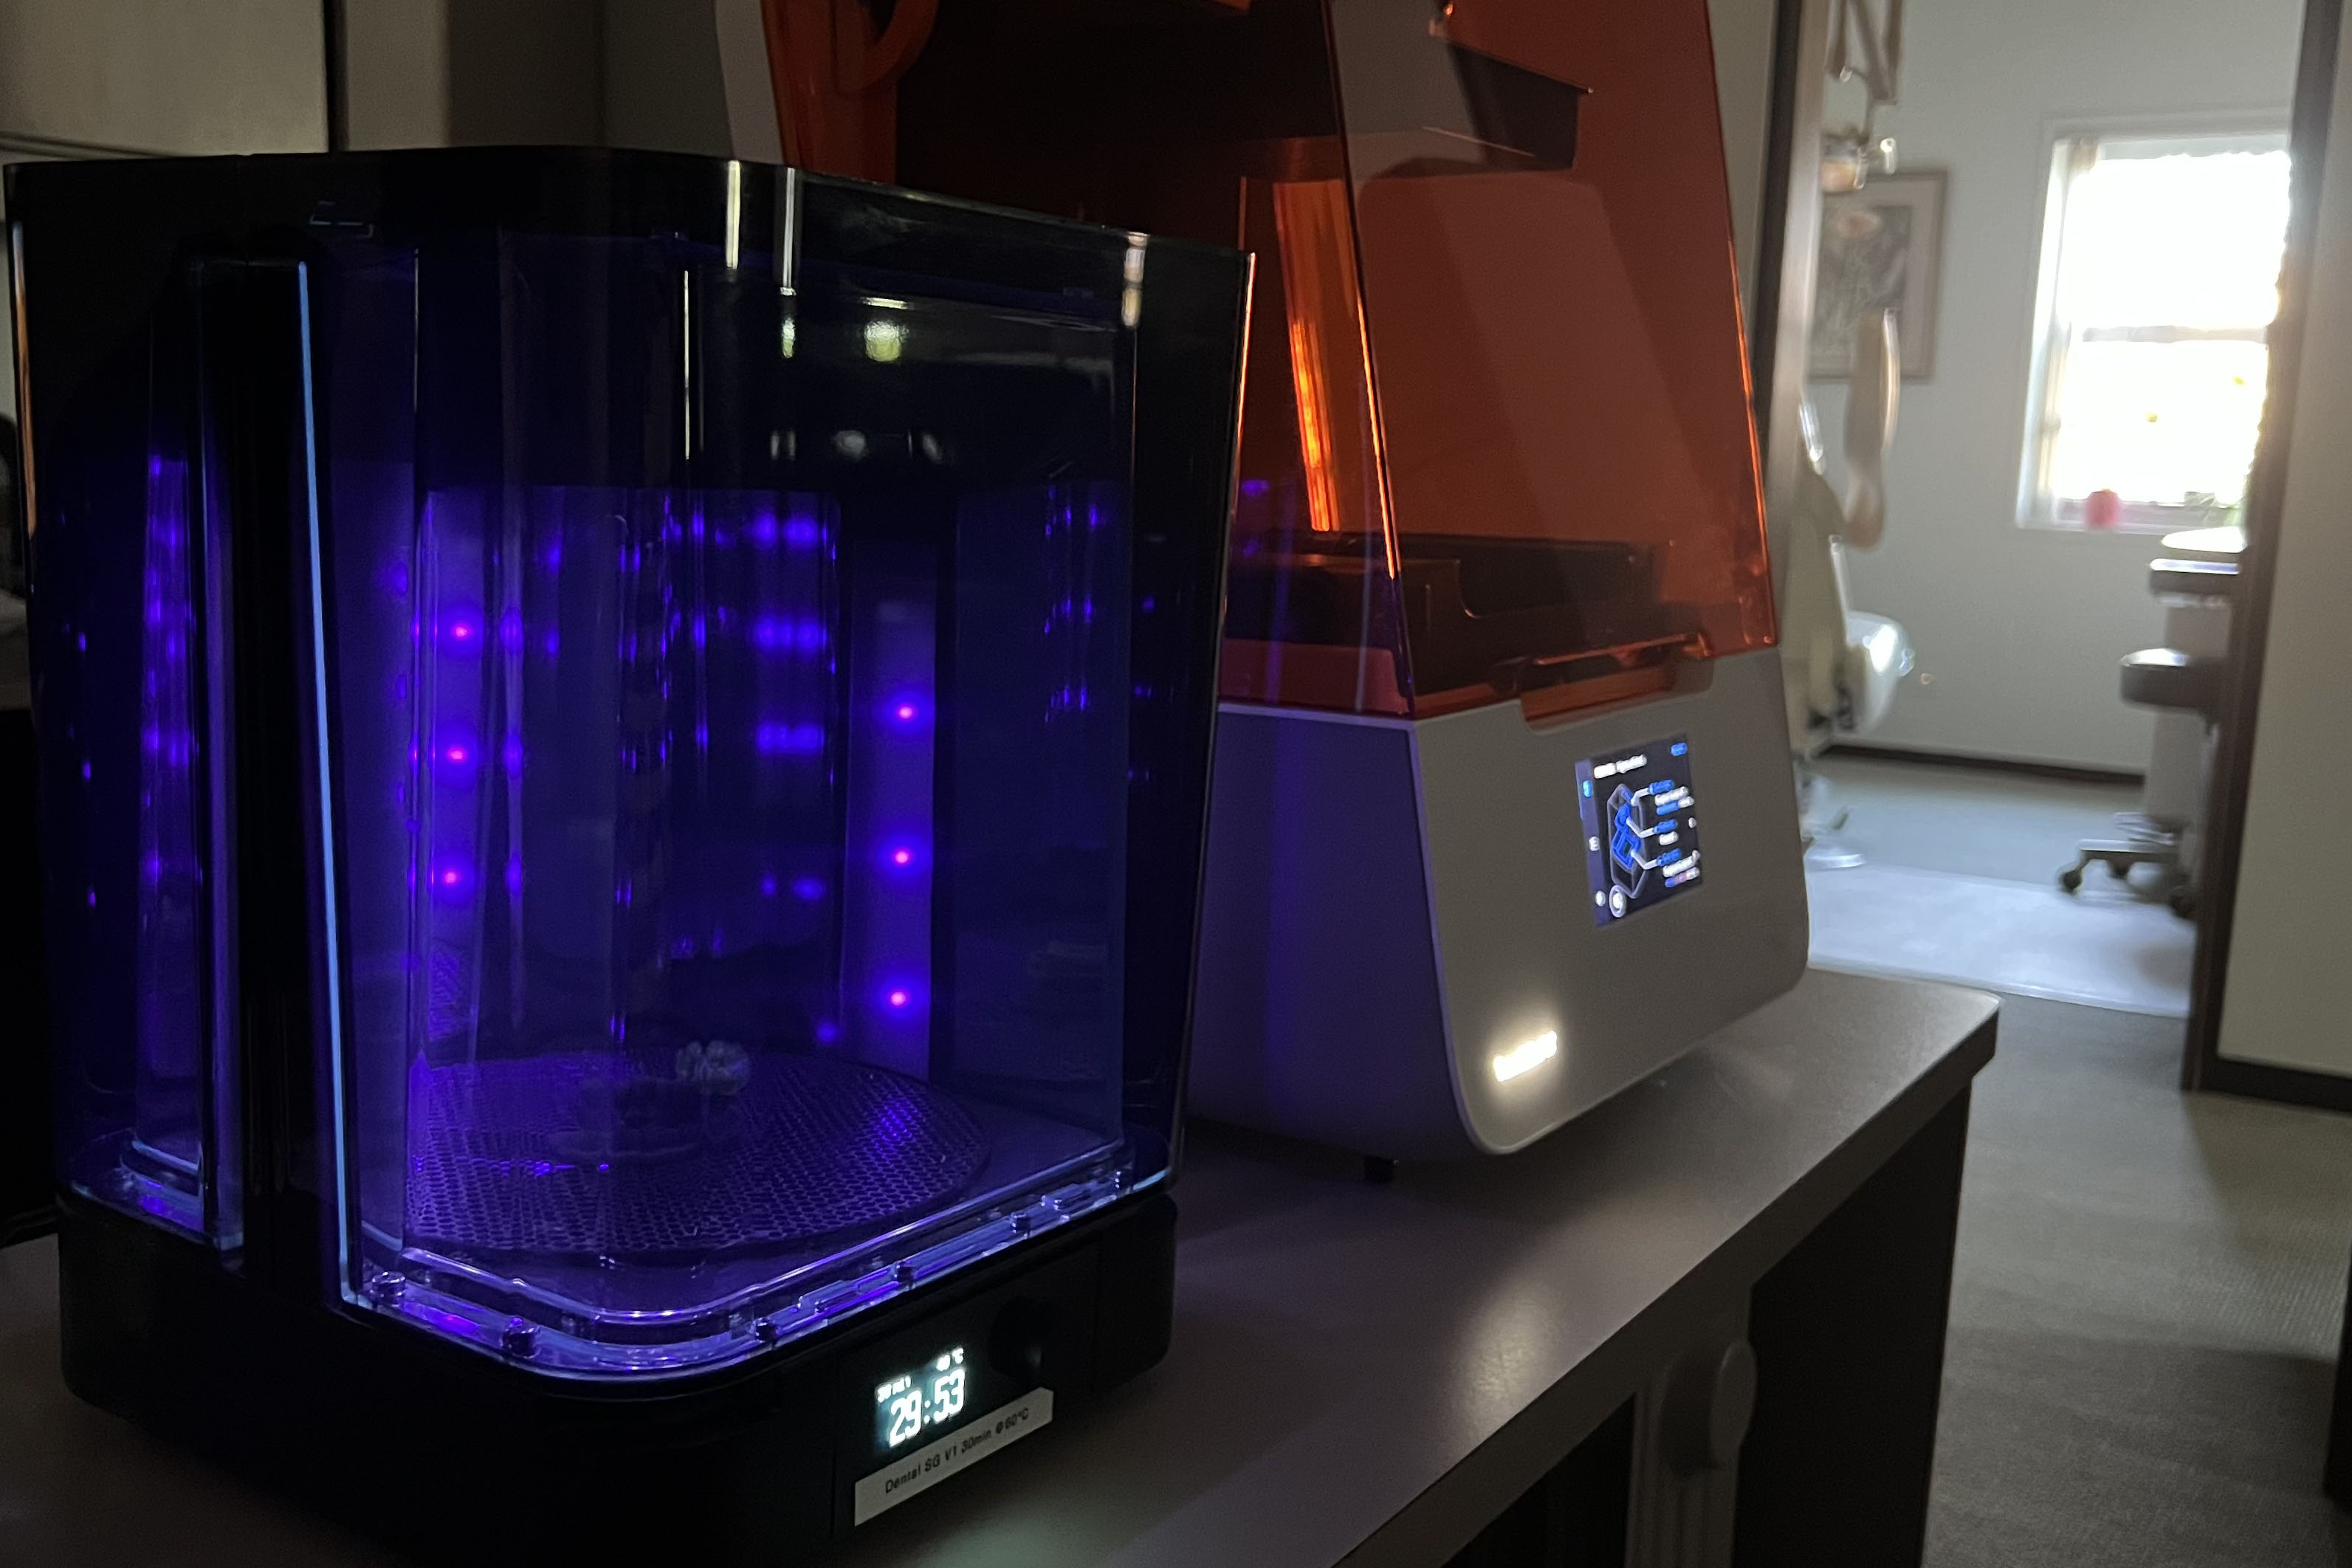 A picutre of a 3D printer and post cure machine sitting on a table post cure machine is illuminated and in use